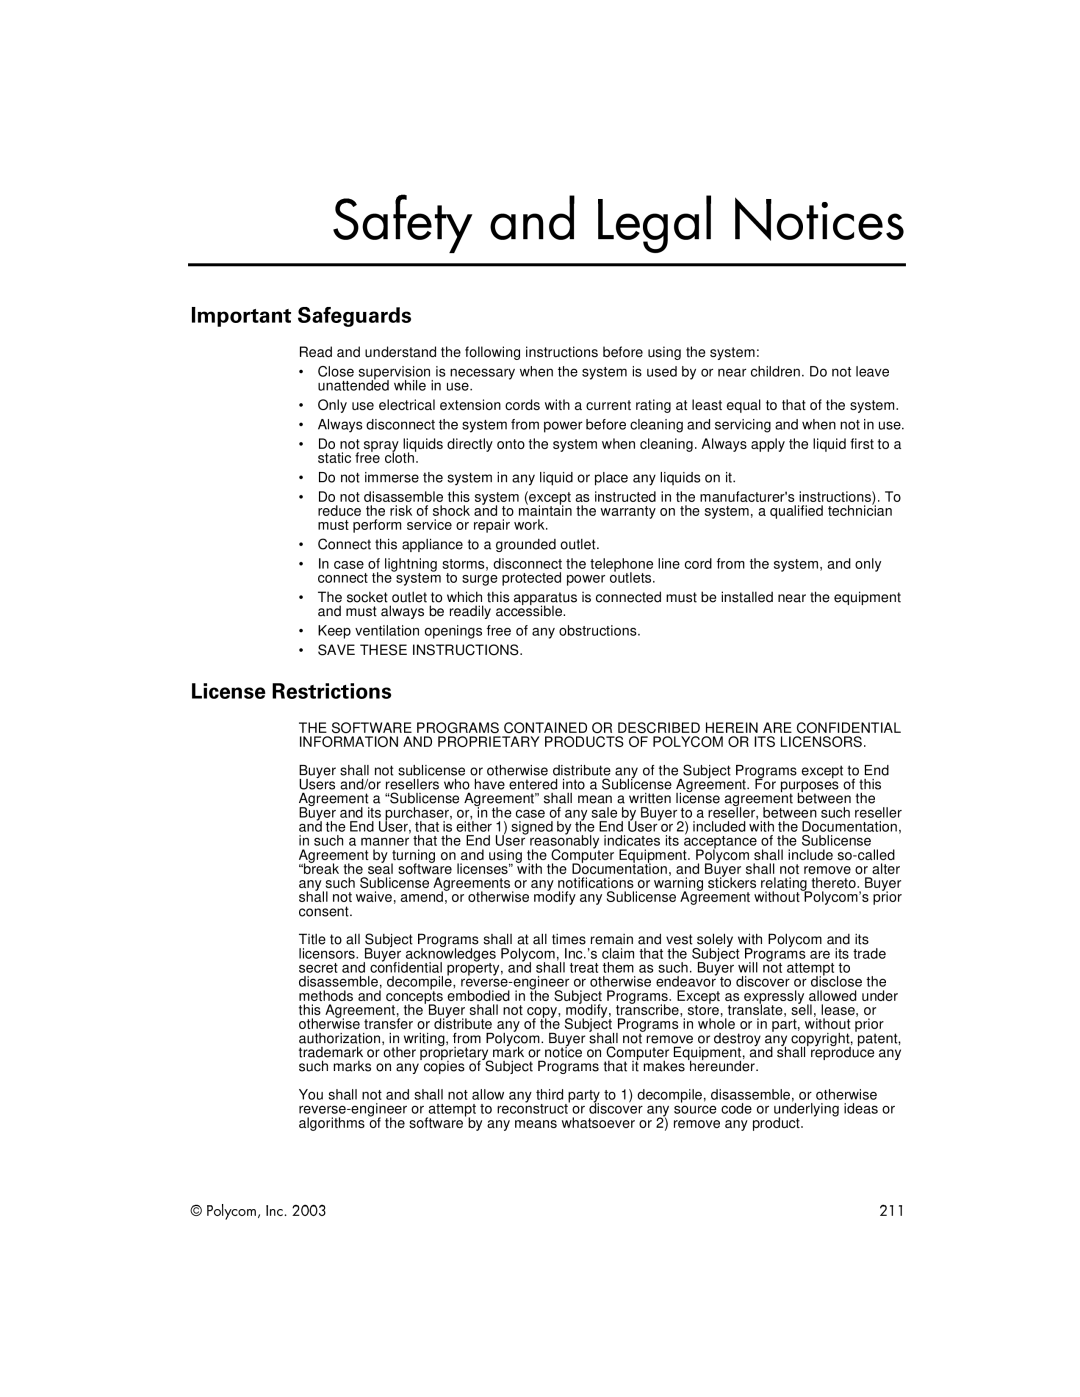 Polycom VIEWSTATION EX manual Important Safeguards, License Restrictions, Safety and Legal Notices 